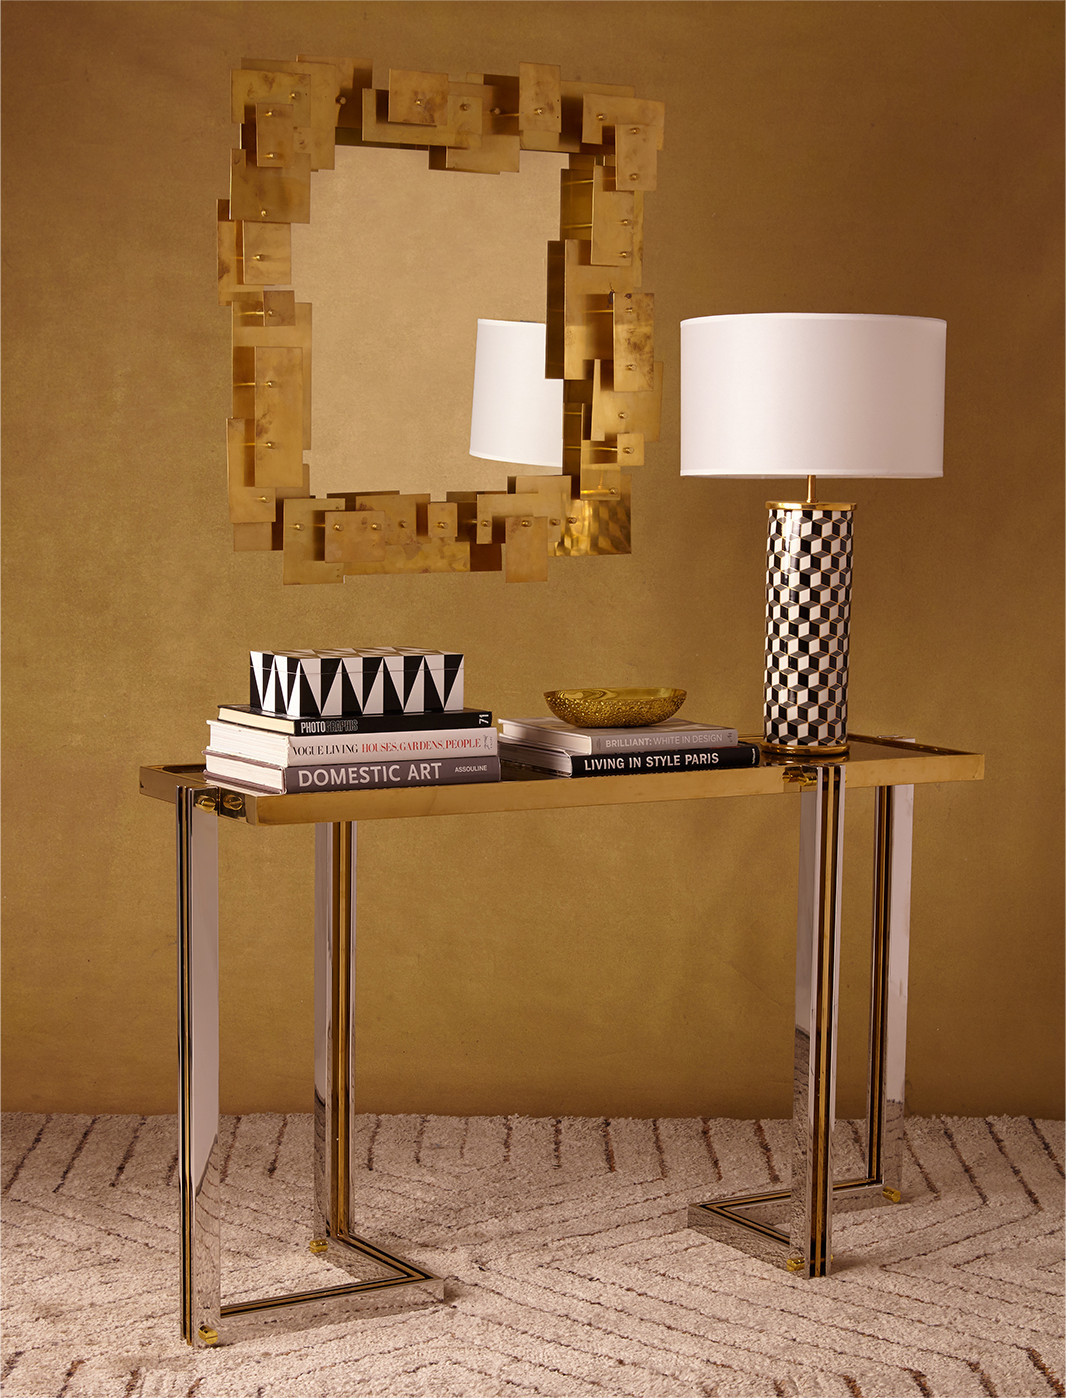 Puzzle Mirror - Modern - Entry - New York - by Jonathan Adler | Houzz